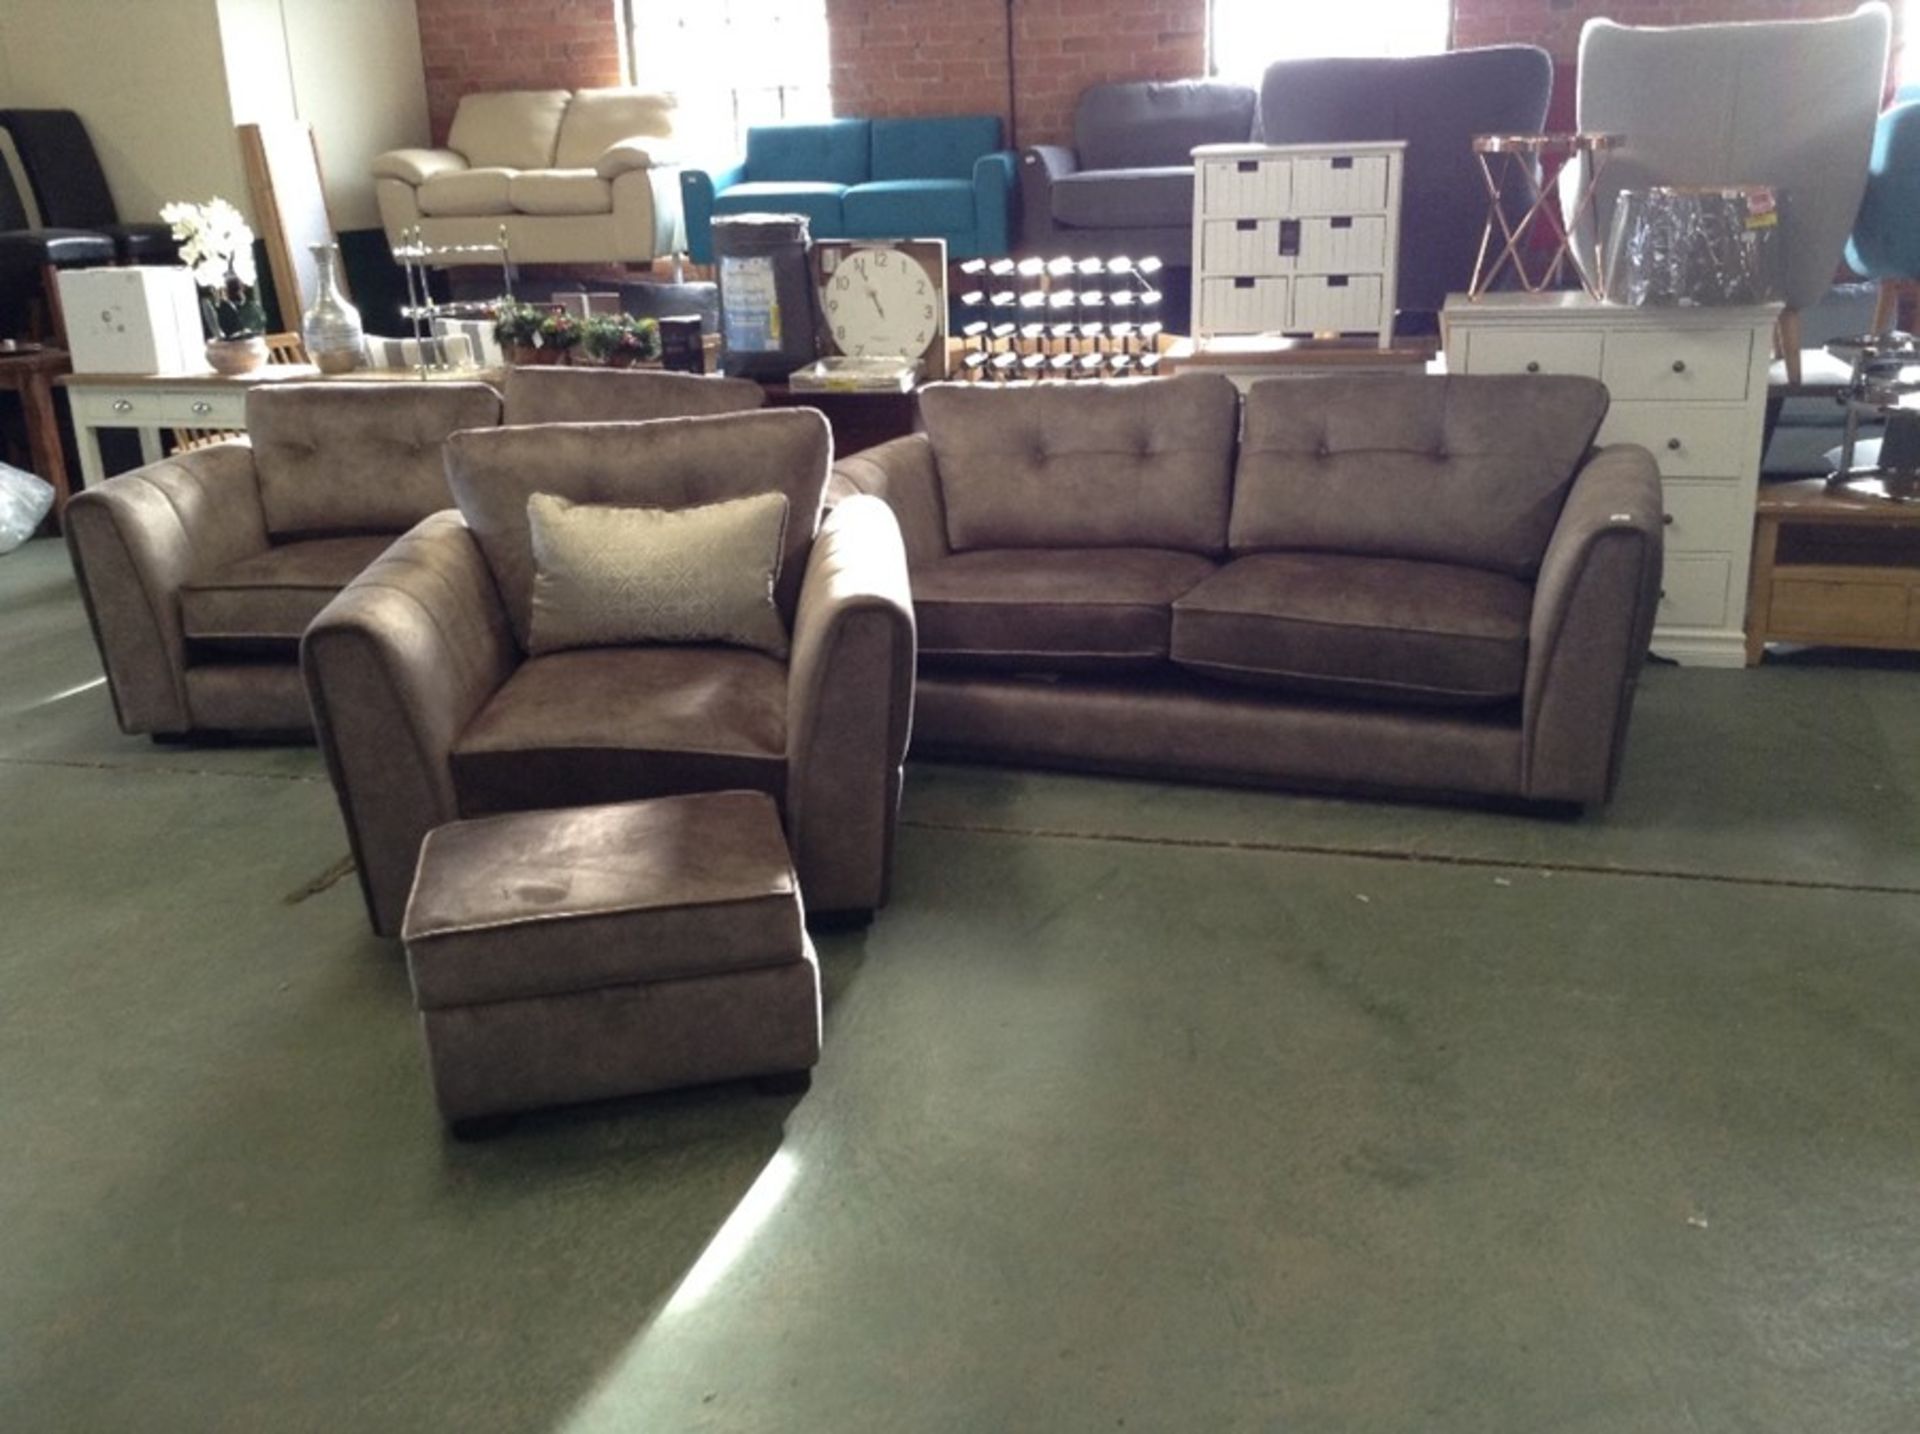 BEIGE SADDLE 3 SEATER 2 SEATER CHAIR & STORAGE FOO